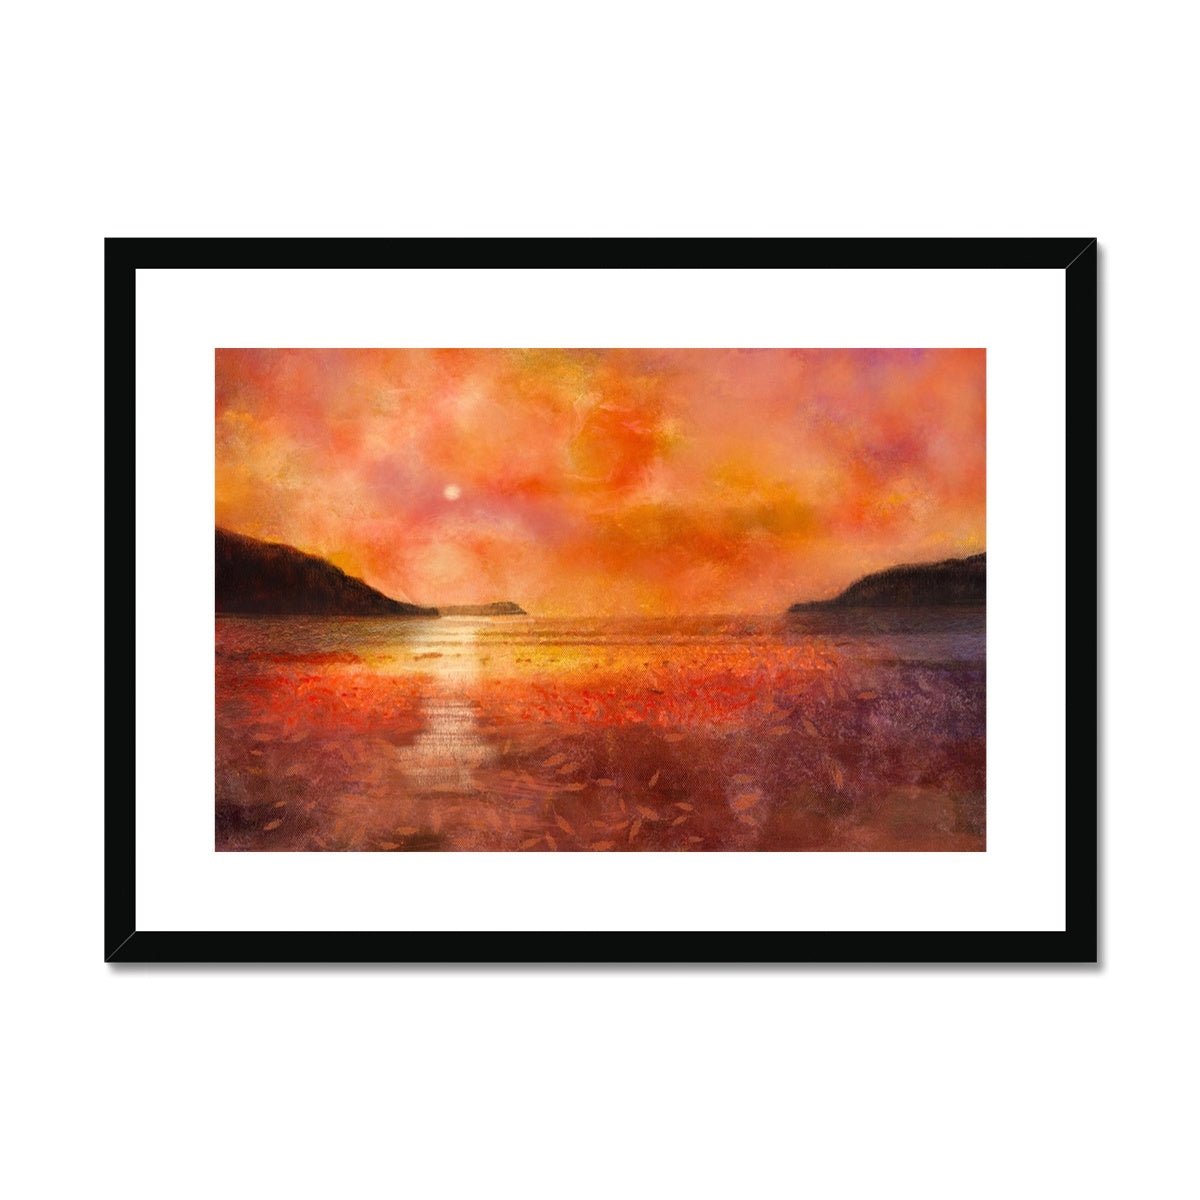 Calgary Beach Sunset Mull Painting | Framed & Mounted Prints From Scotland-Framed & Mounted Prints-Hebridean Islands Art Gallery-A2 Landscape-Black Frame-Paintings, Prints, Homeware, Art Gifts From Scotland By Scottish Artist Kevin Hunter